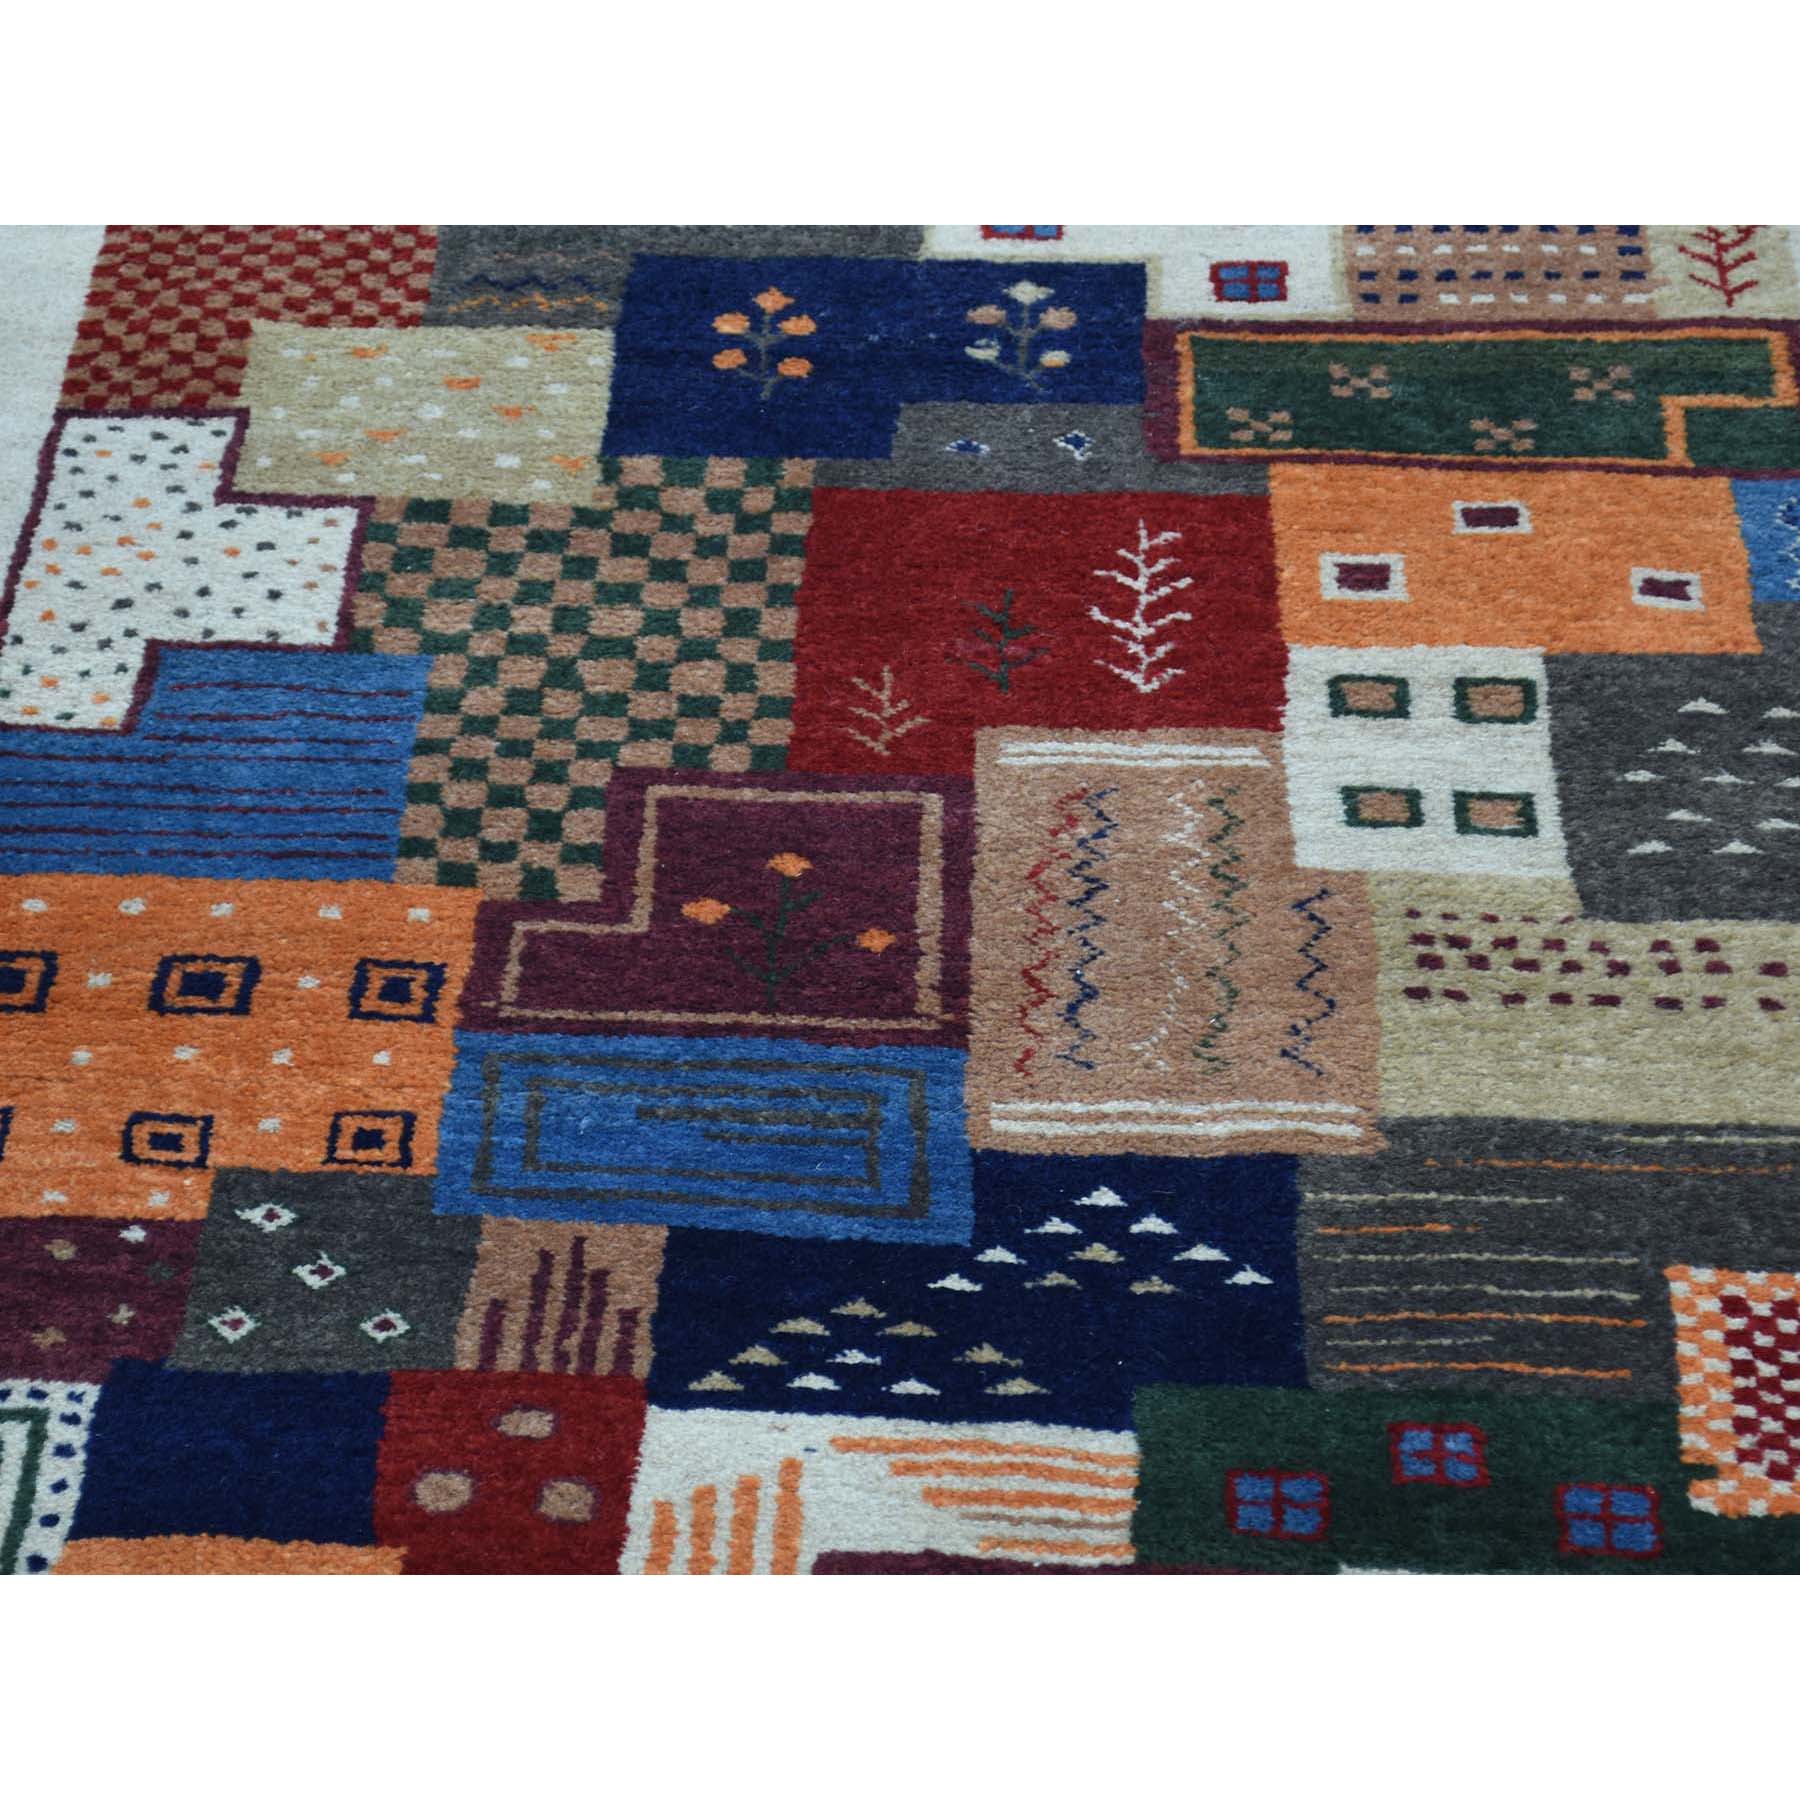 2-x3- Hand-Knotted Persian Wool Lori Buft Gabbeh Patchwork Design Rug 